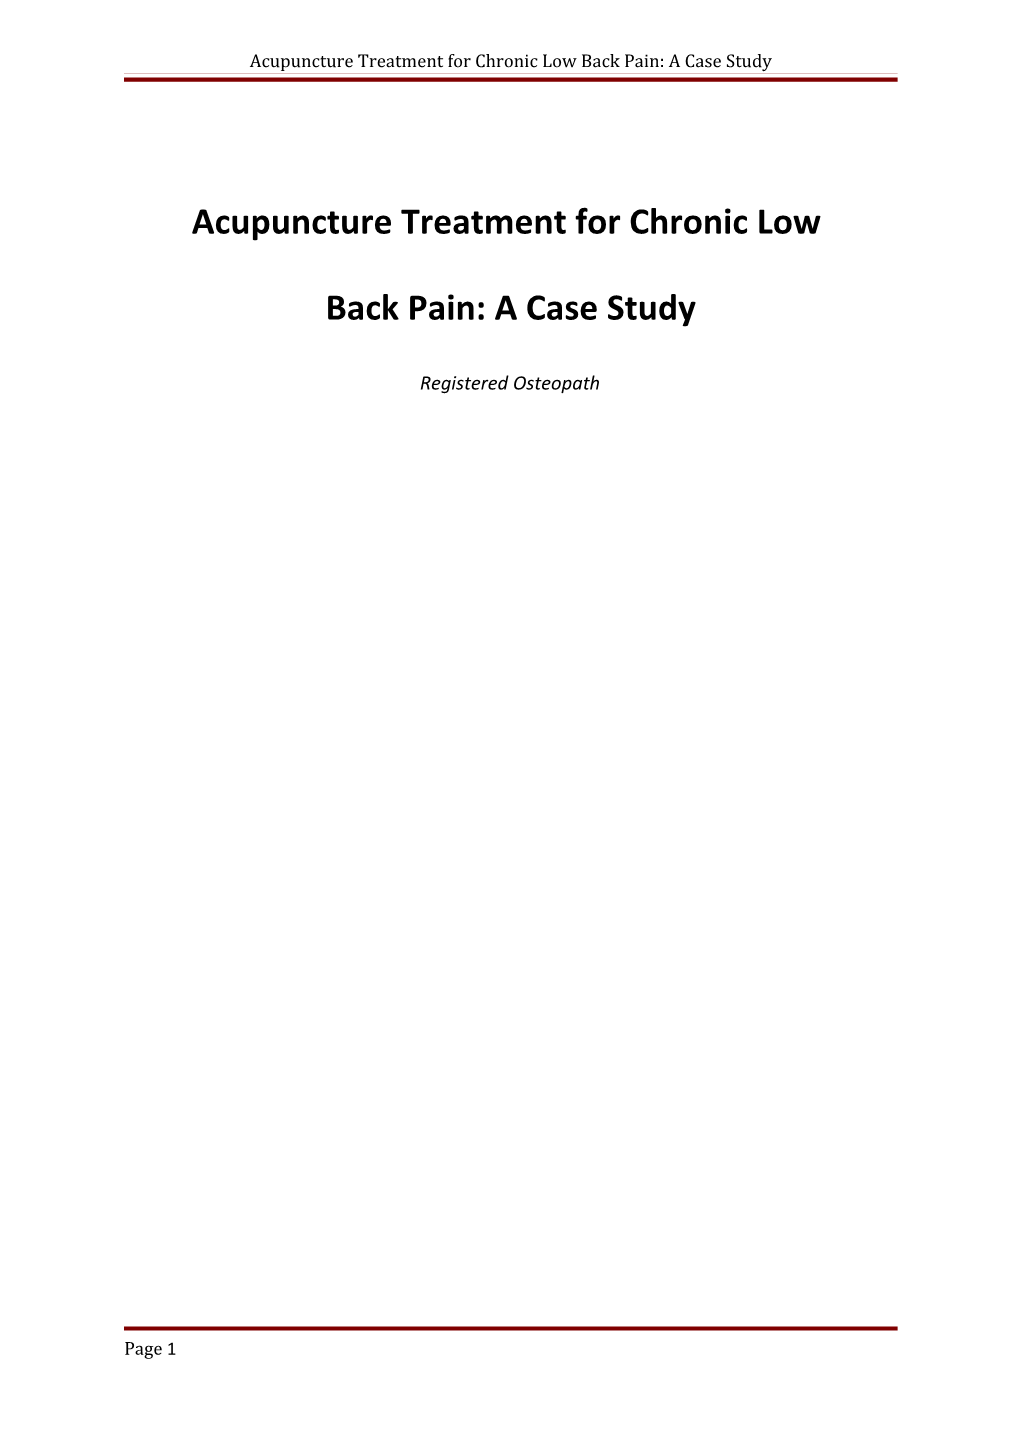 Acupuncture Treatment for Chronic Low Back Pain: a Case Study